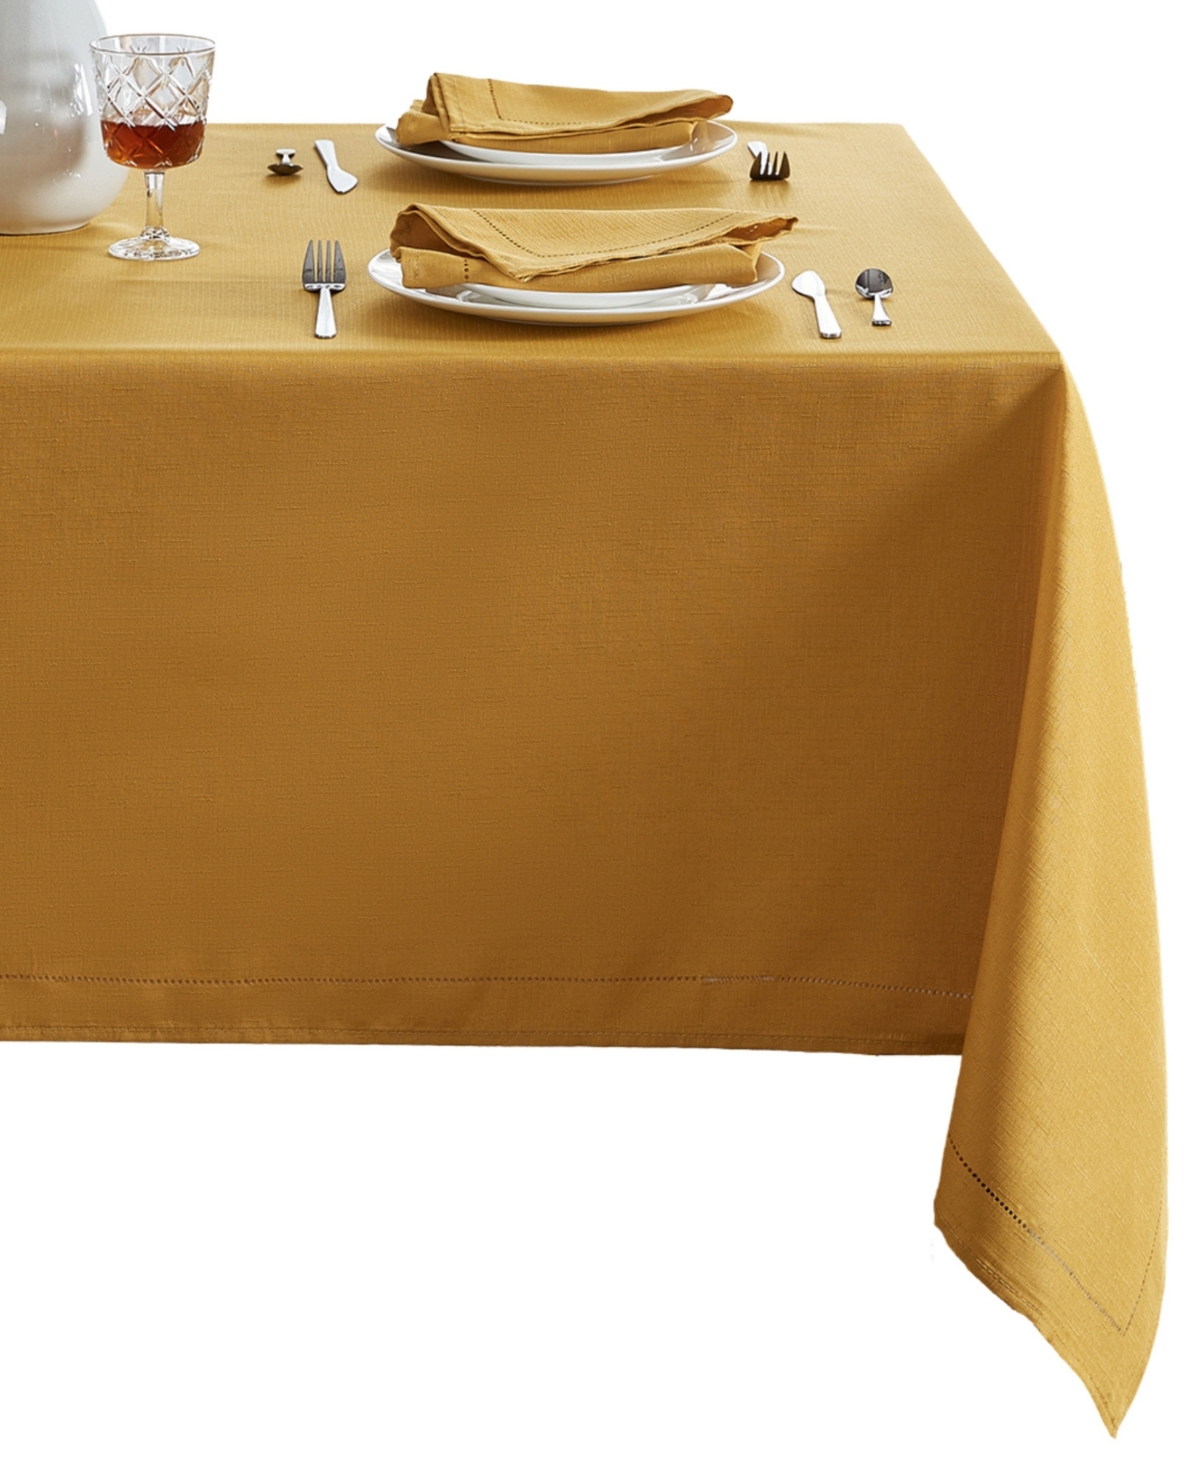 Elrene Alison Eyelet Punched Border Fabric Tablecloth 52" X 52" In Golden Yellow